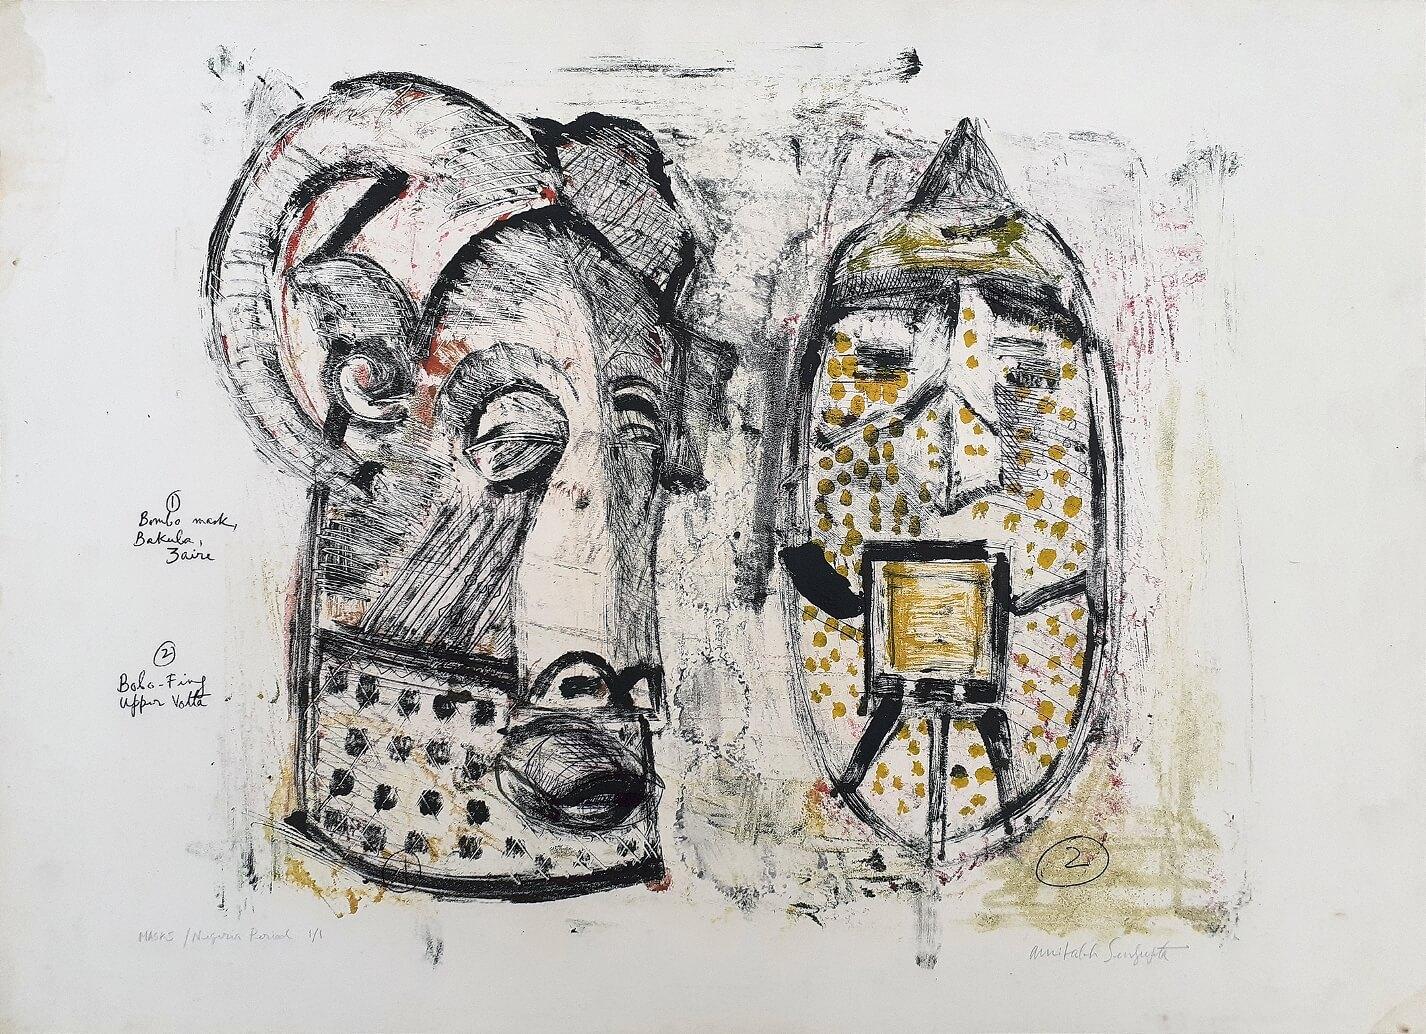 Masks Nigeria Period, Frottage on Paper, Edition 1/1 by Modern Artist "In Stock"